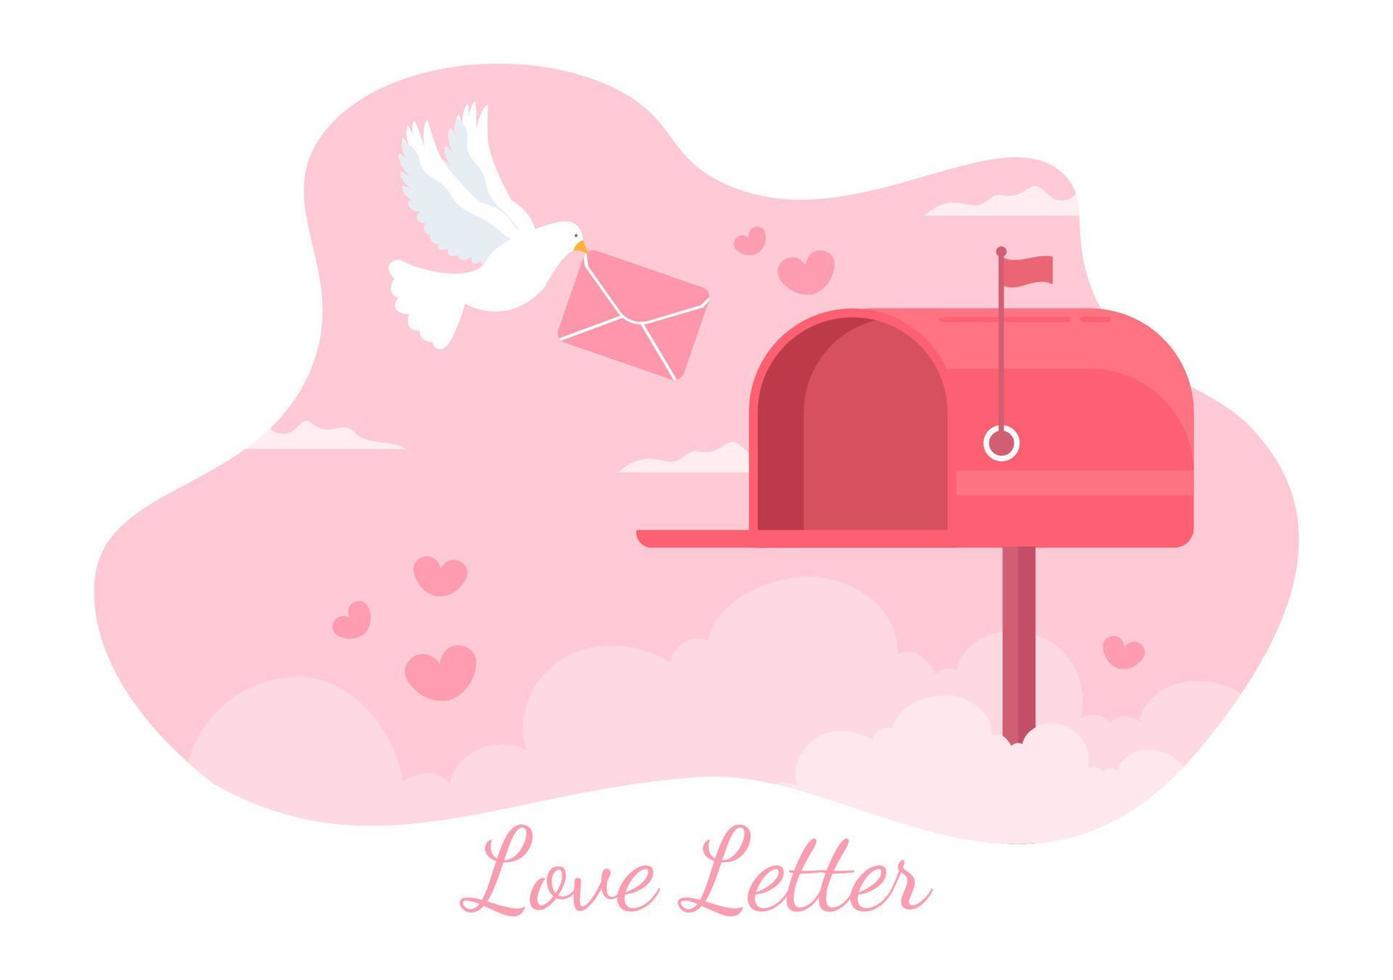 Love Letter Background Flat Illustration. Messages for Fraternity or Friendship Usually Given on Valentine's Day in an Envelope or Greeting Card Via Mailbox vector